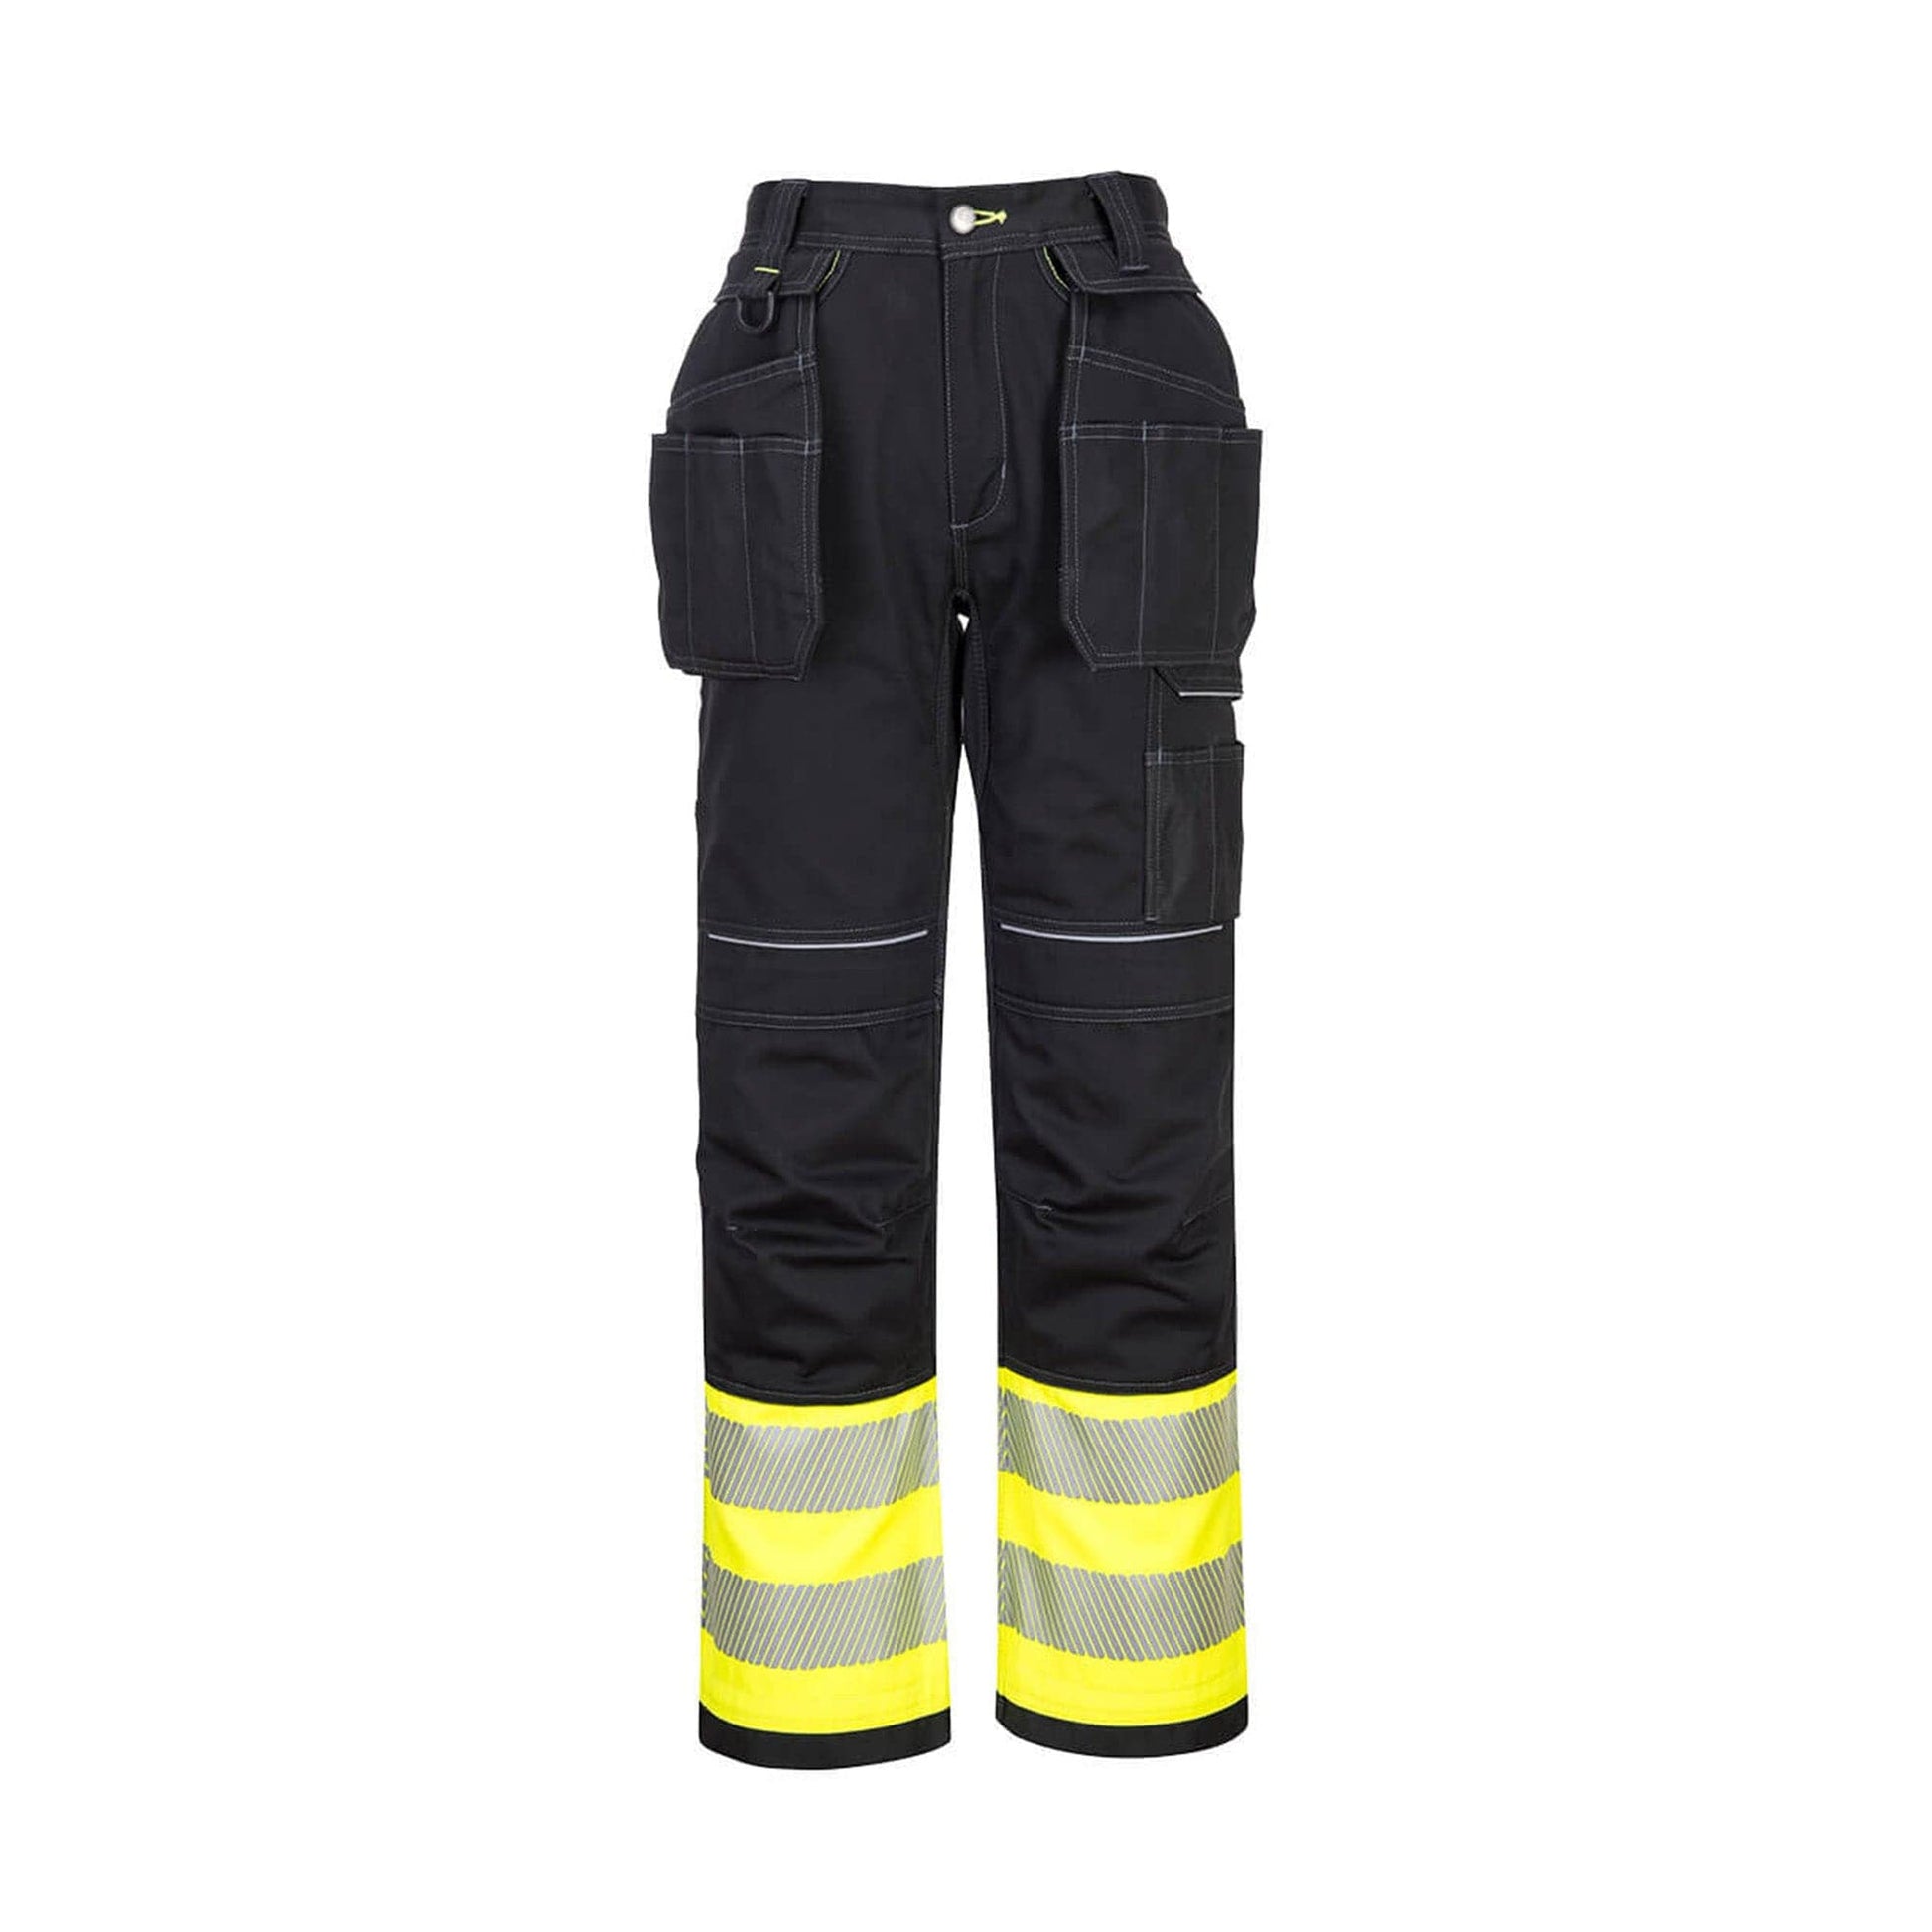 Portwest PW3 Hi Vis Class 1 Holster Pocket Trousers PW307 Yellow